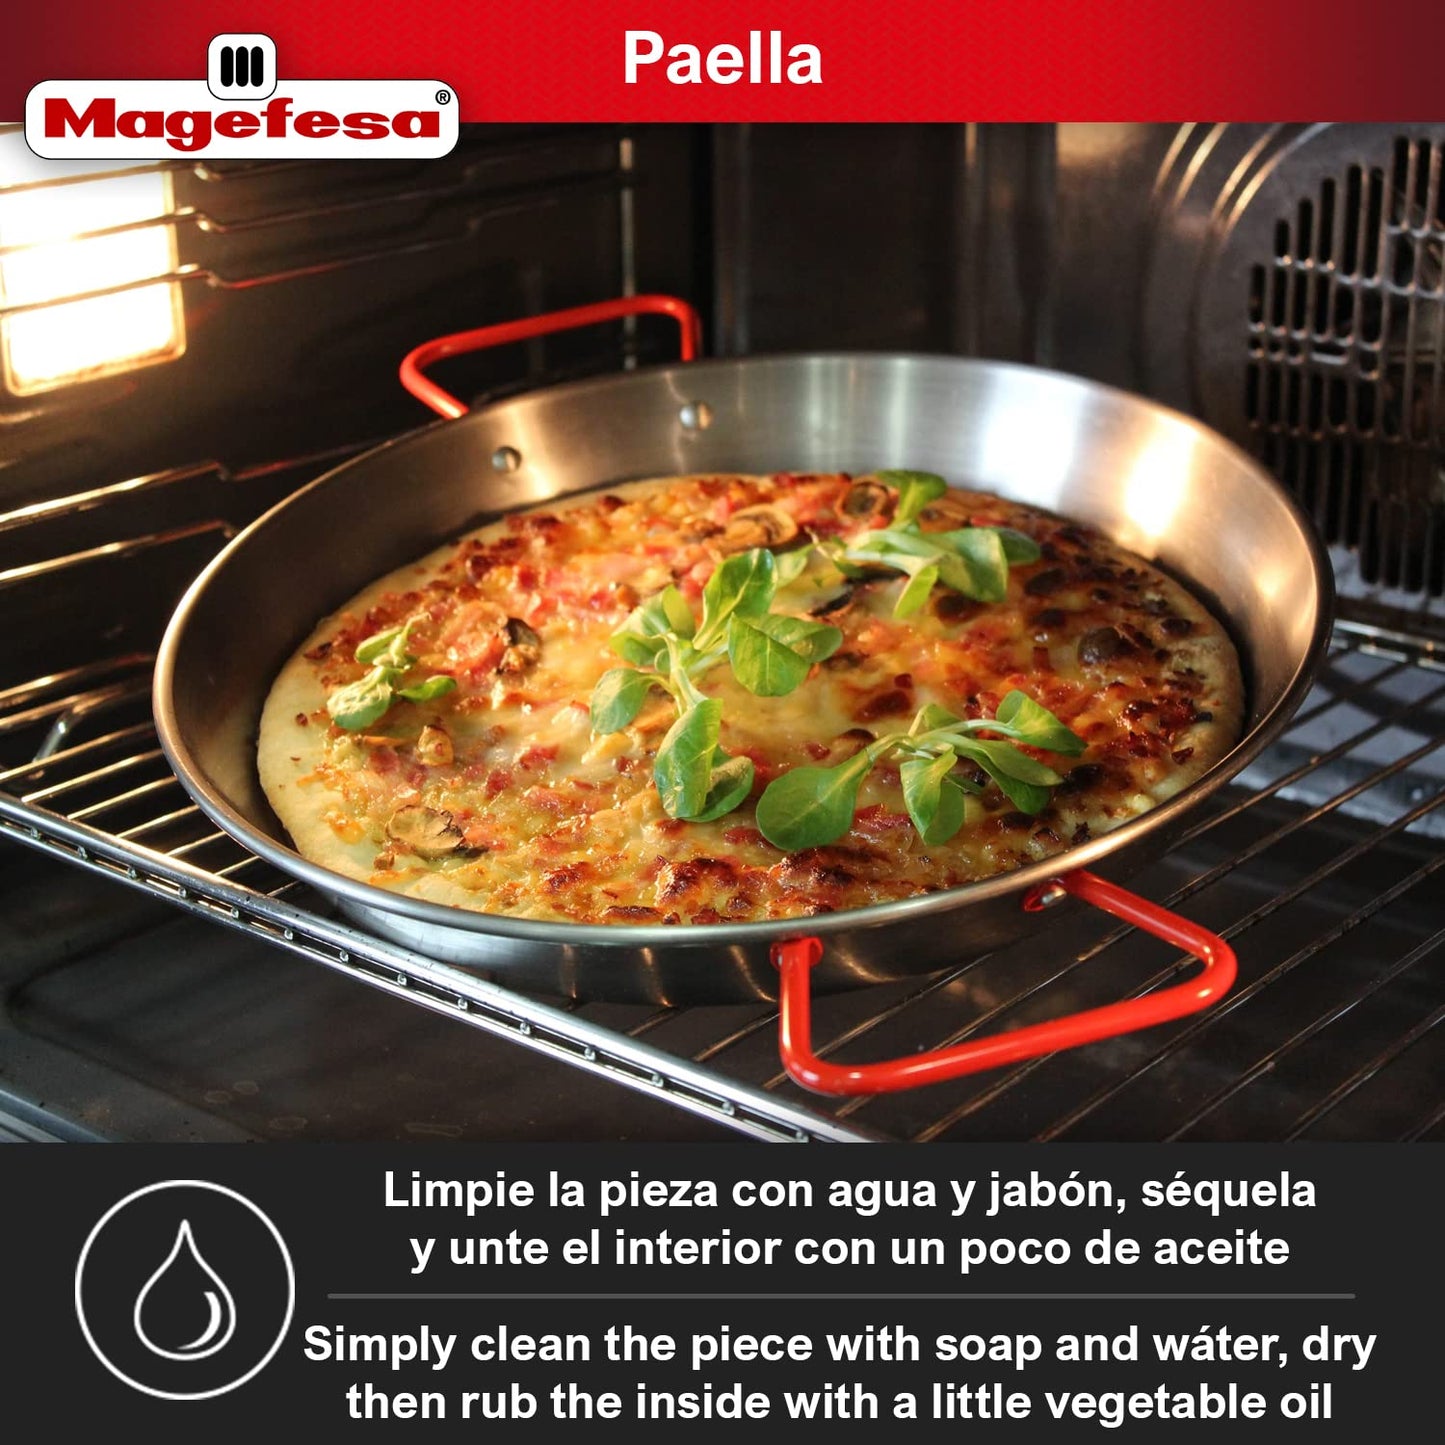 MAGEFESA® Carbon - paella pan 12 in - 30 cm and 4 Servings, made in Carbon Steel, with dimples for greater resistance and lightness, ideal for cooking outdoors, cook your own Valencian paella